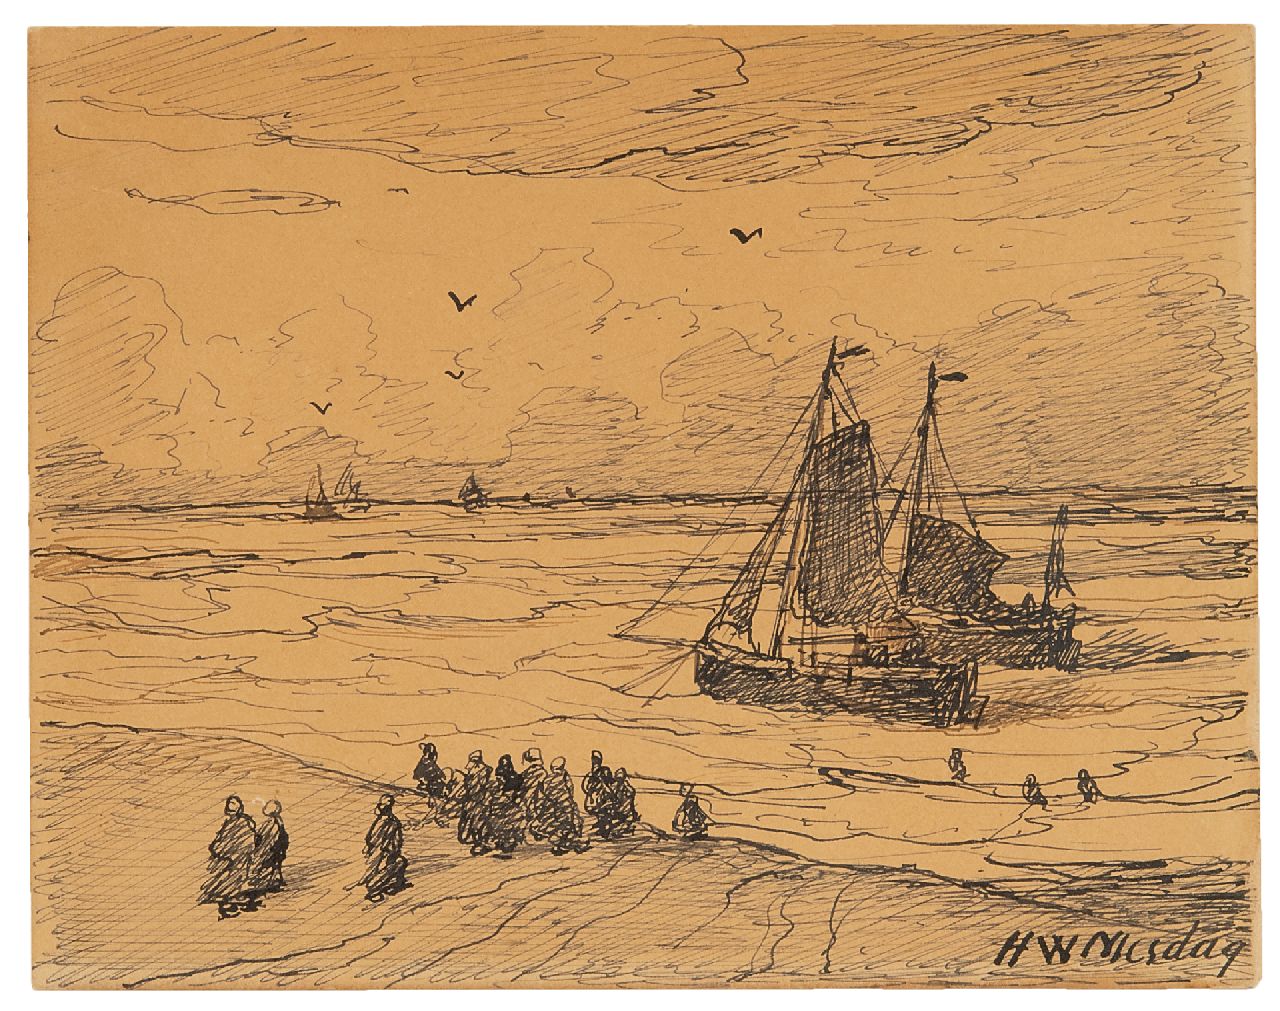 Mesdag H.W.  | Hendrik Willem Mesdag | Watercolours and drawings offered for sale | Fishing ships in the surf, Scheveningen, pen and ink on paper 11.4 x 14.5 cm, signed l.r. and dated on the reverse 3 Nov 1894